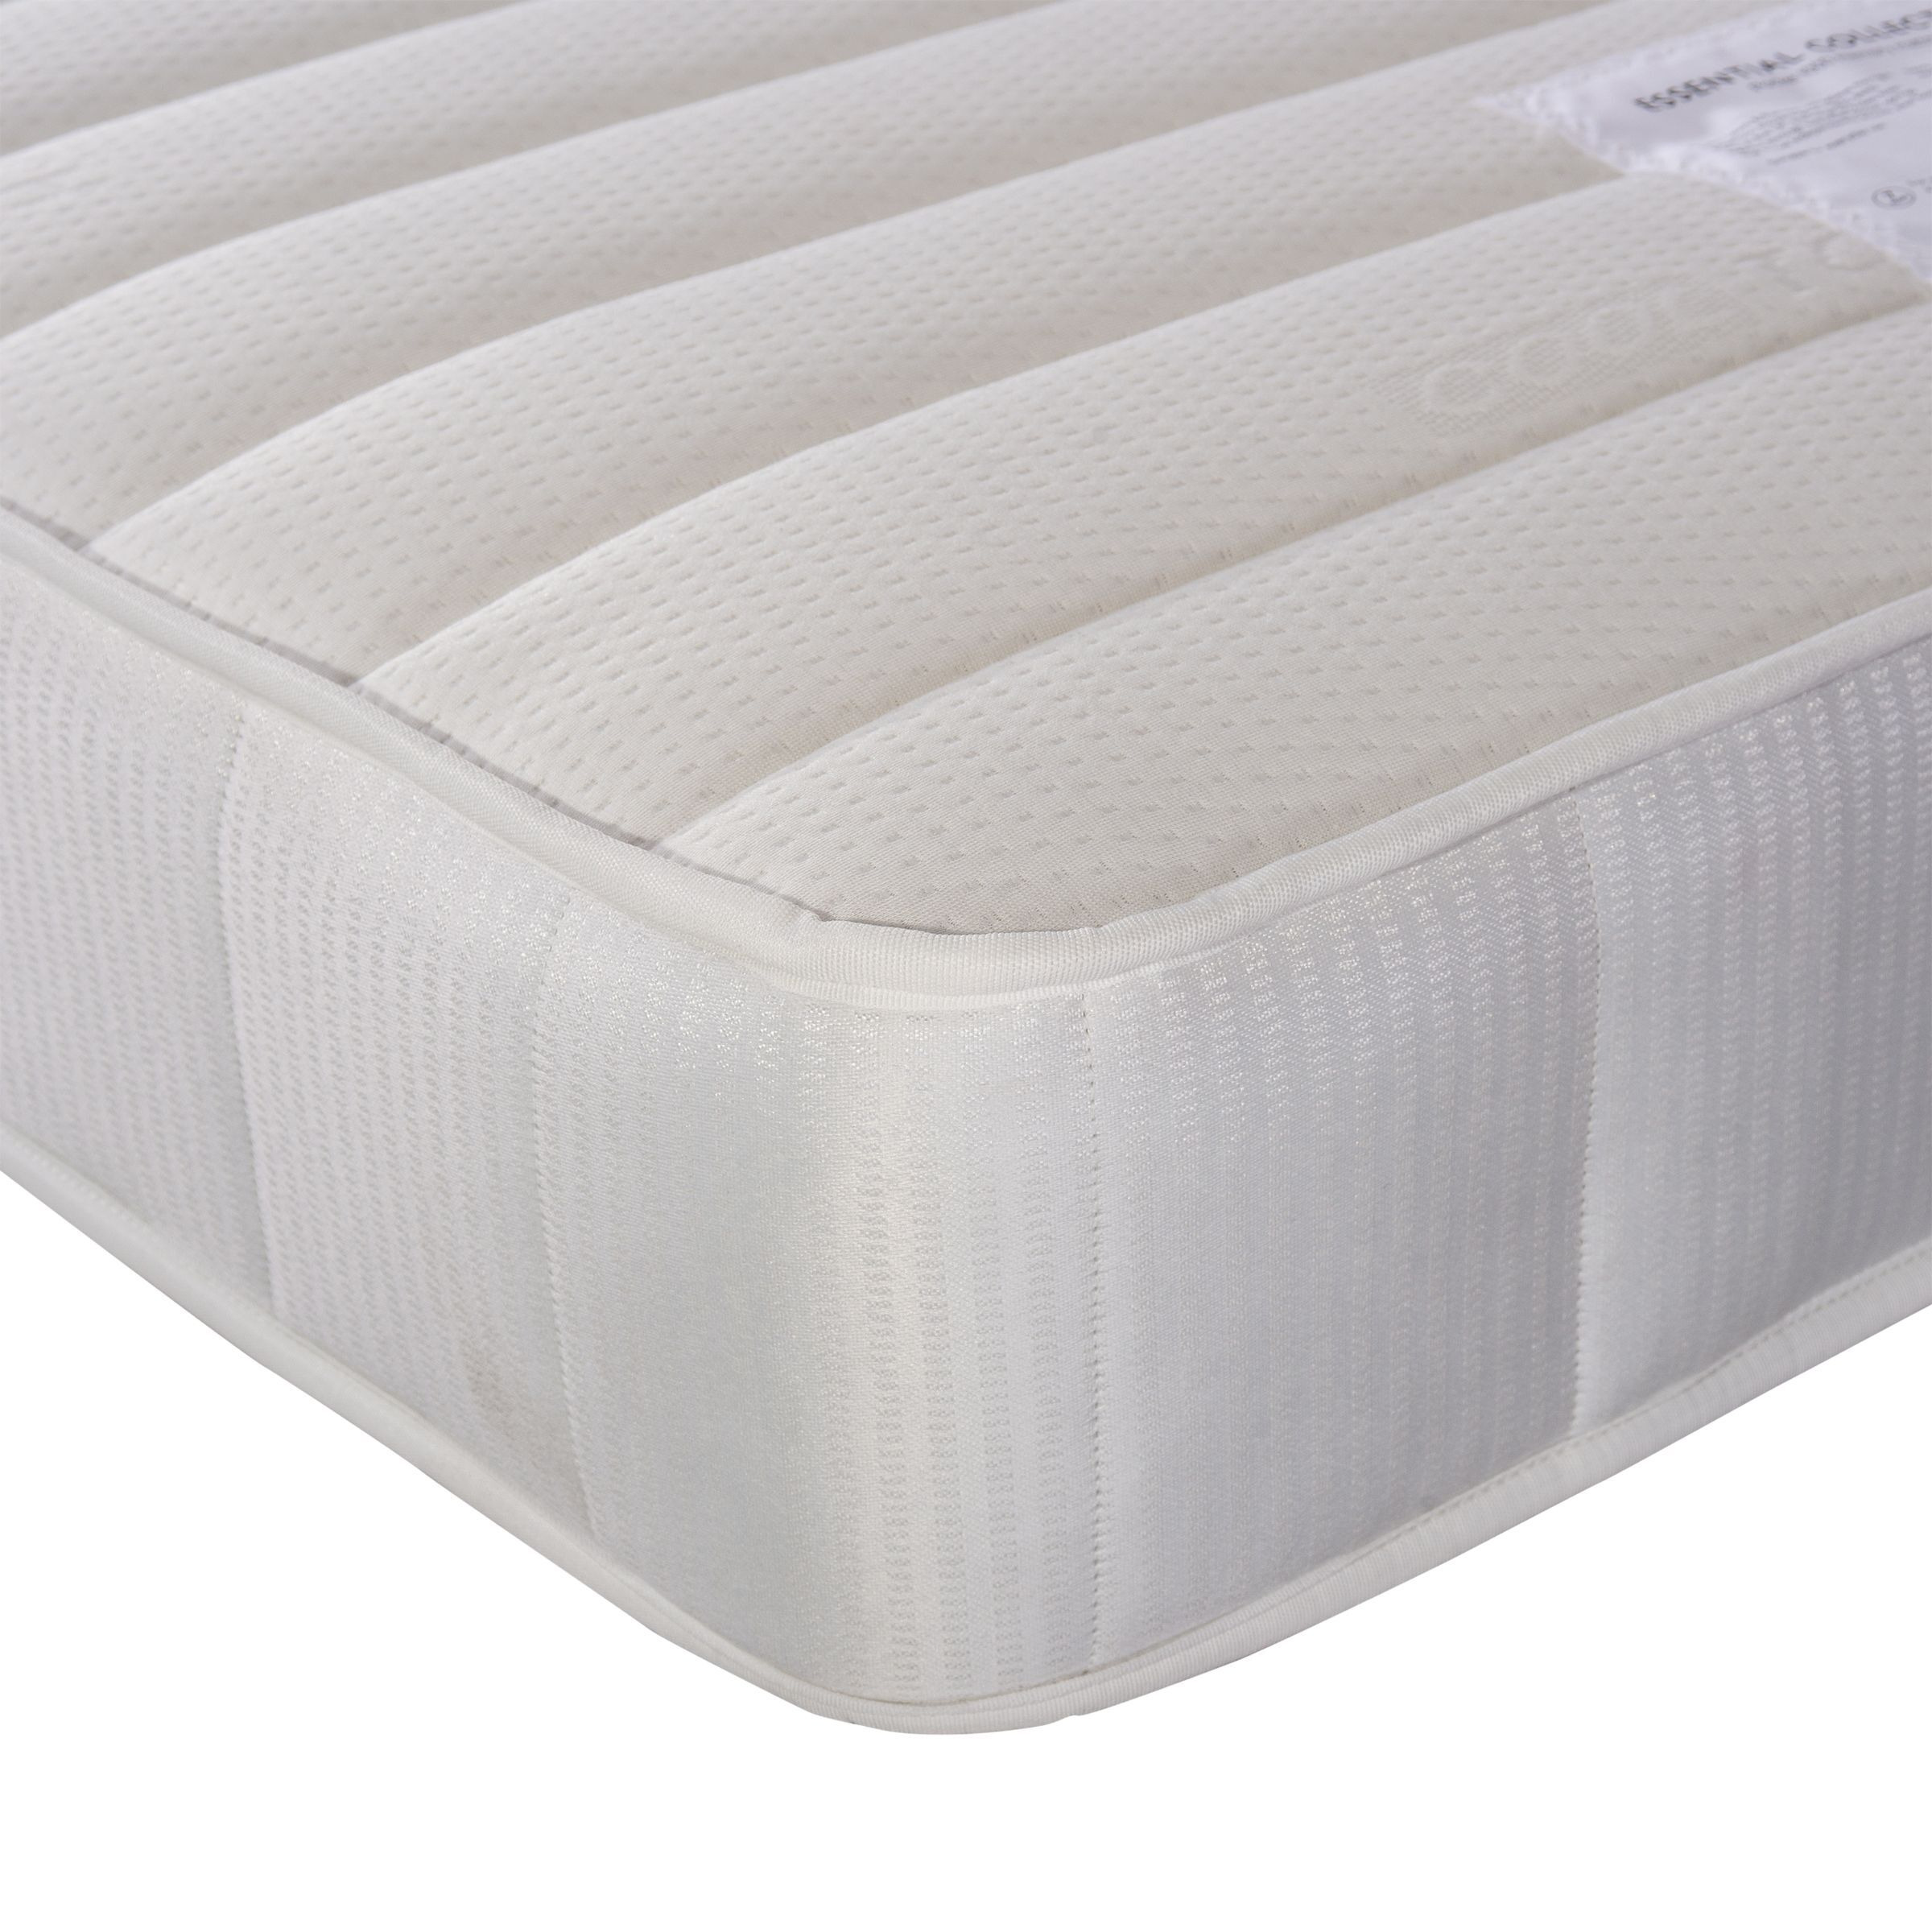 ANYDAY John Lewis & Partners Essentials Collection Pocket Memory 1000, Medium Tension Pocket Spring Mattress, Small Double